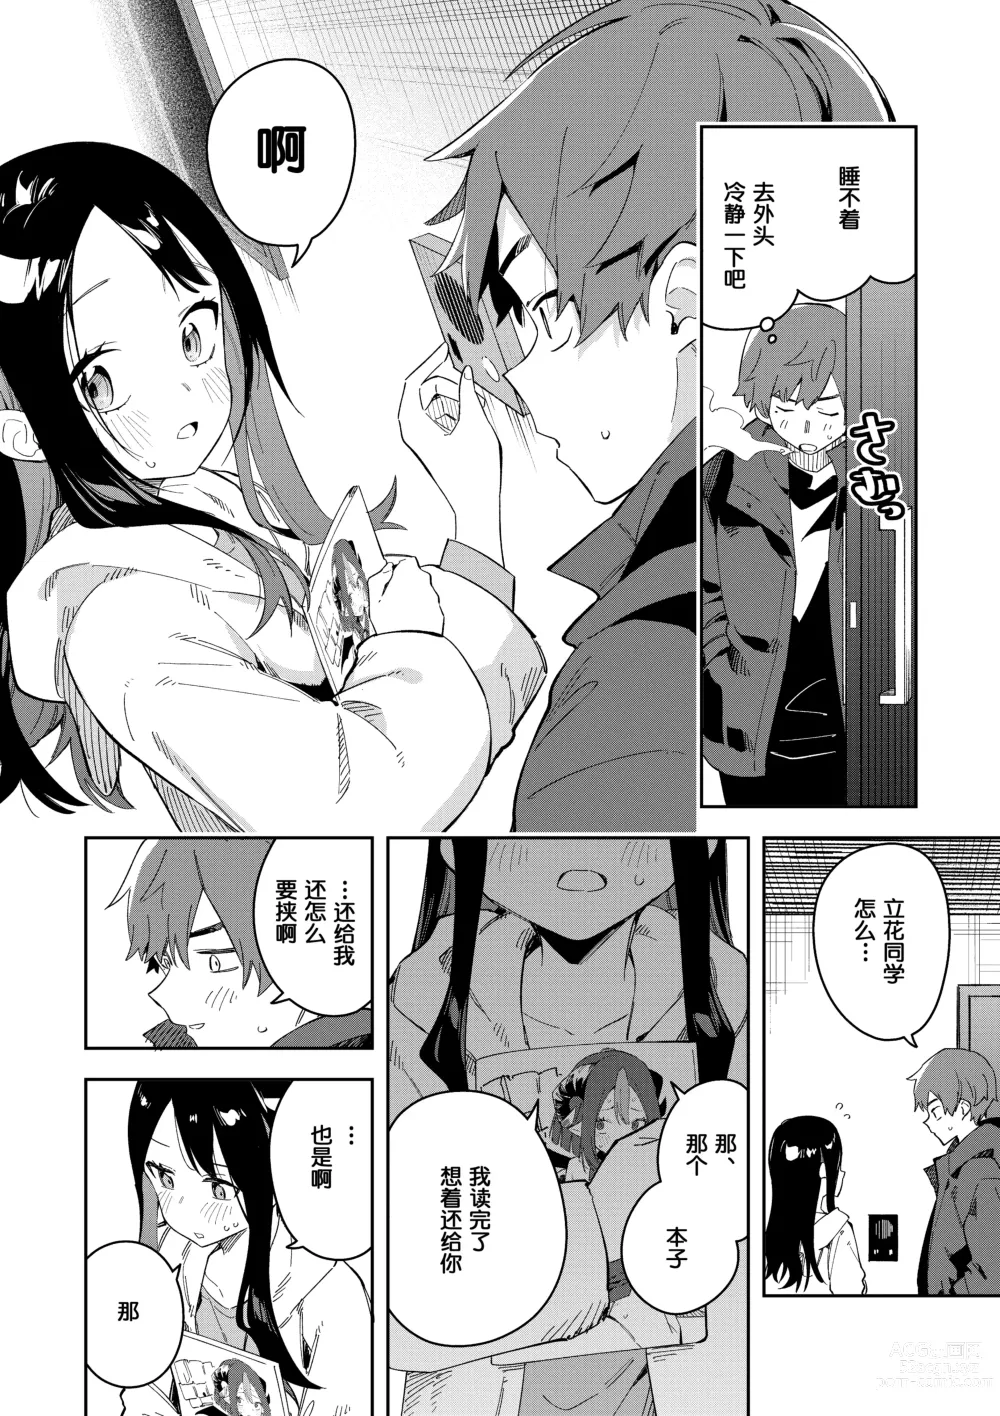 Page 18 of doujinshi 隣人は有名配信者3人目